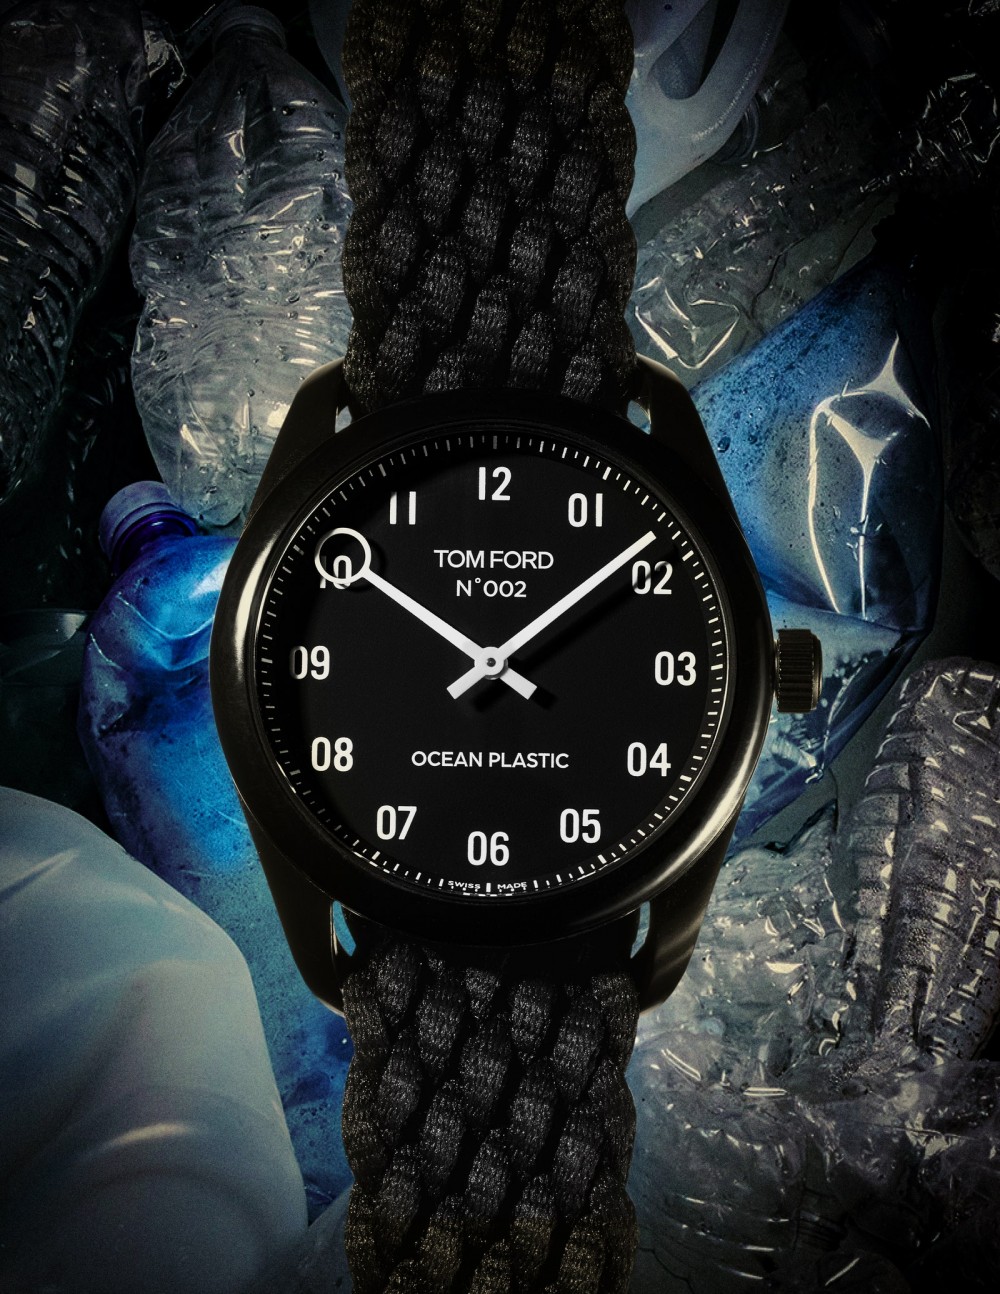 The Tom Ford Ocean Plastic watch